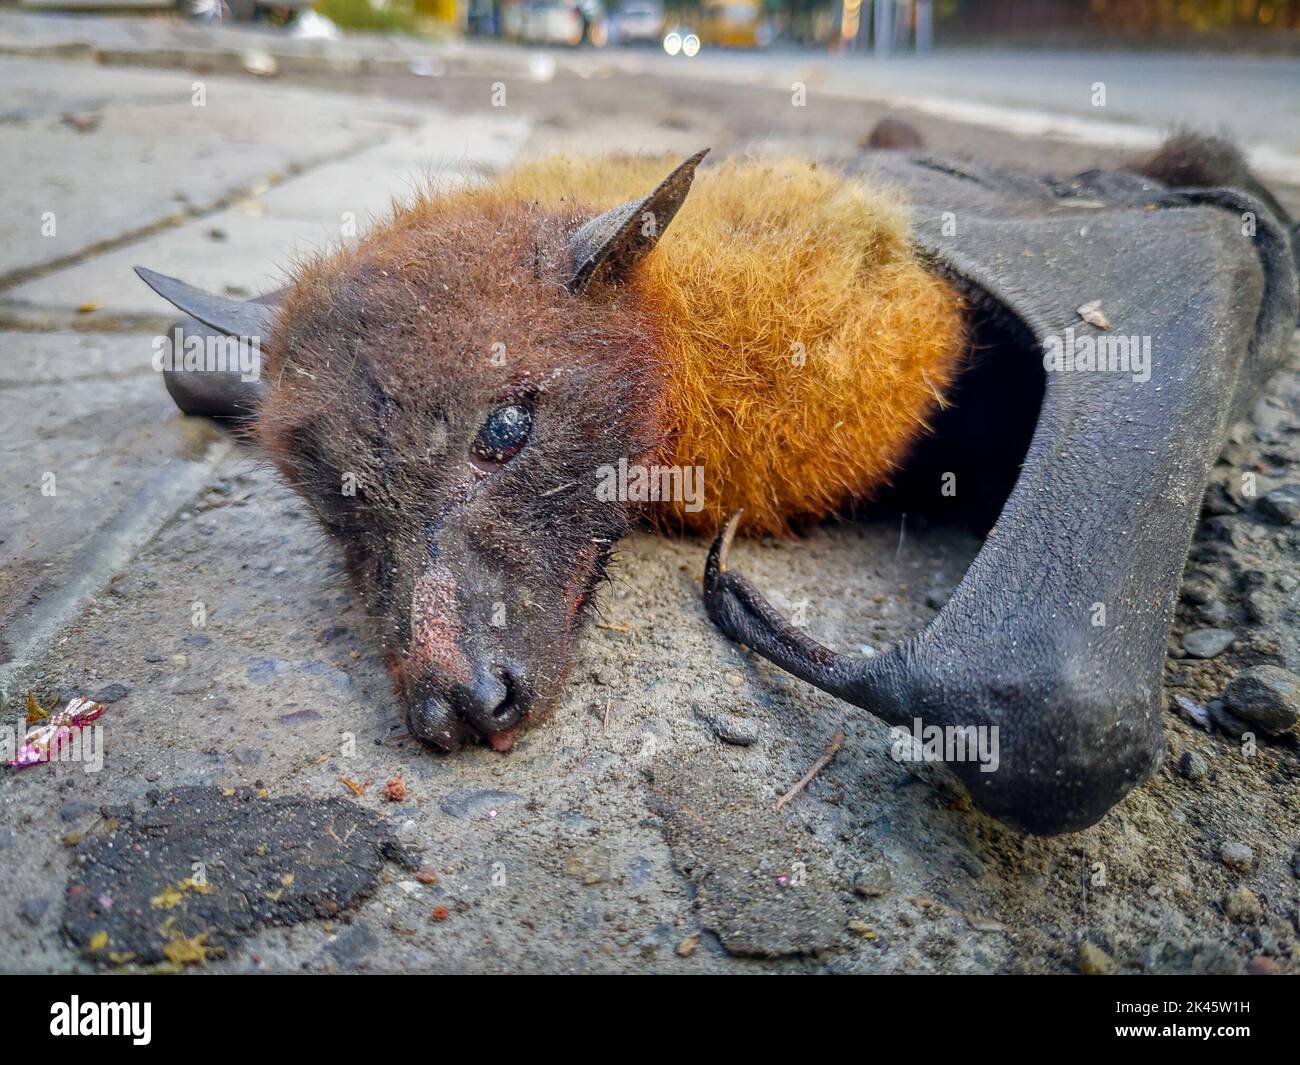 A dead electrocuted bat in the middle of the road. Uttarakhand India. Stock Photo